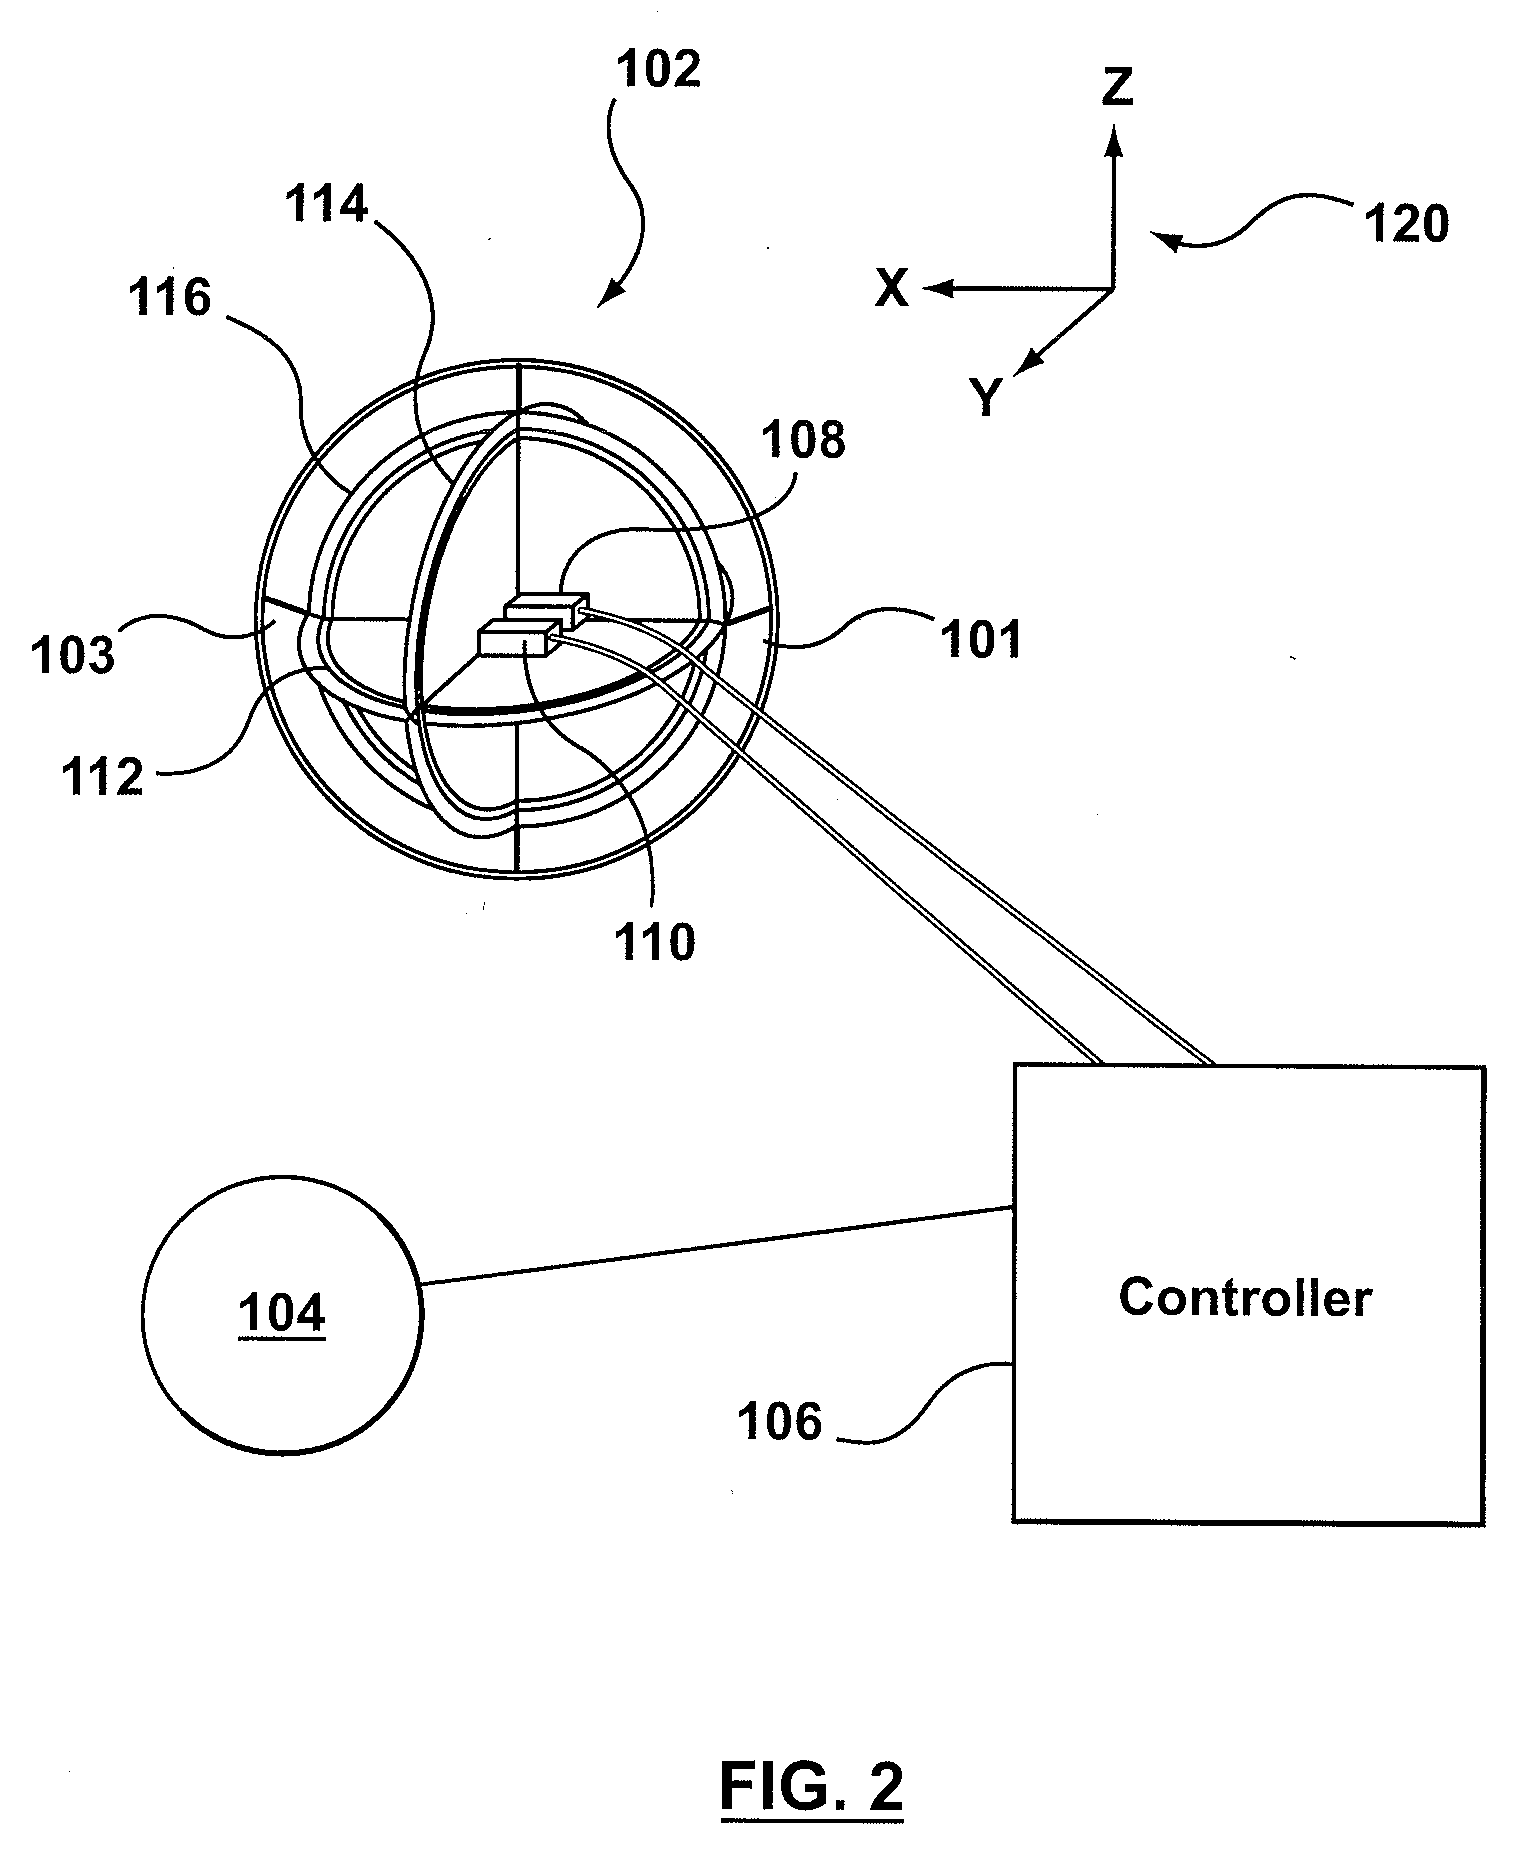 Receiver coil assembly for airborne geophysical surveying with noise mitigation